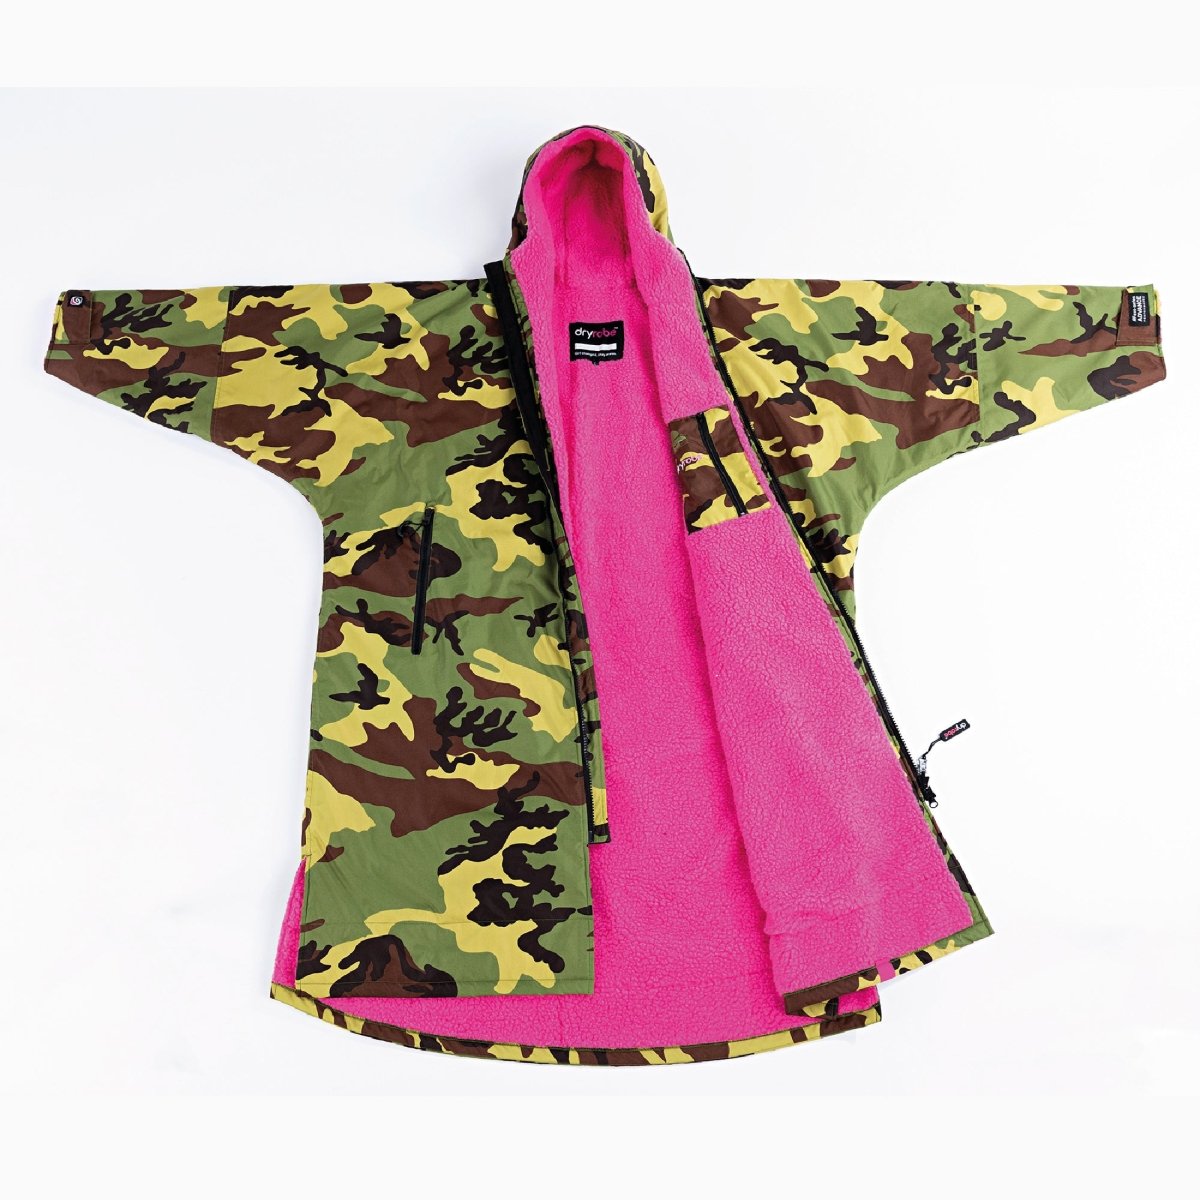 Long Sleeved dryrobe Advance in Camouflage & Pink - Paddle People